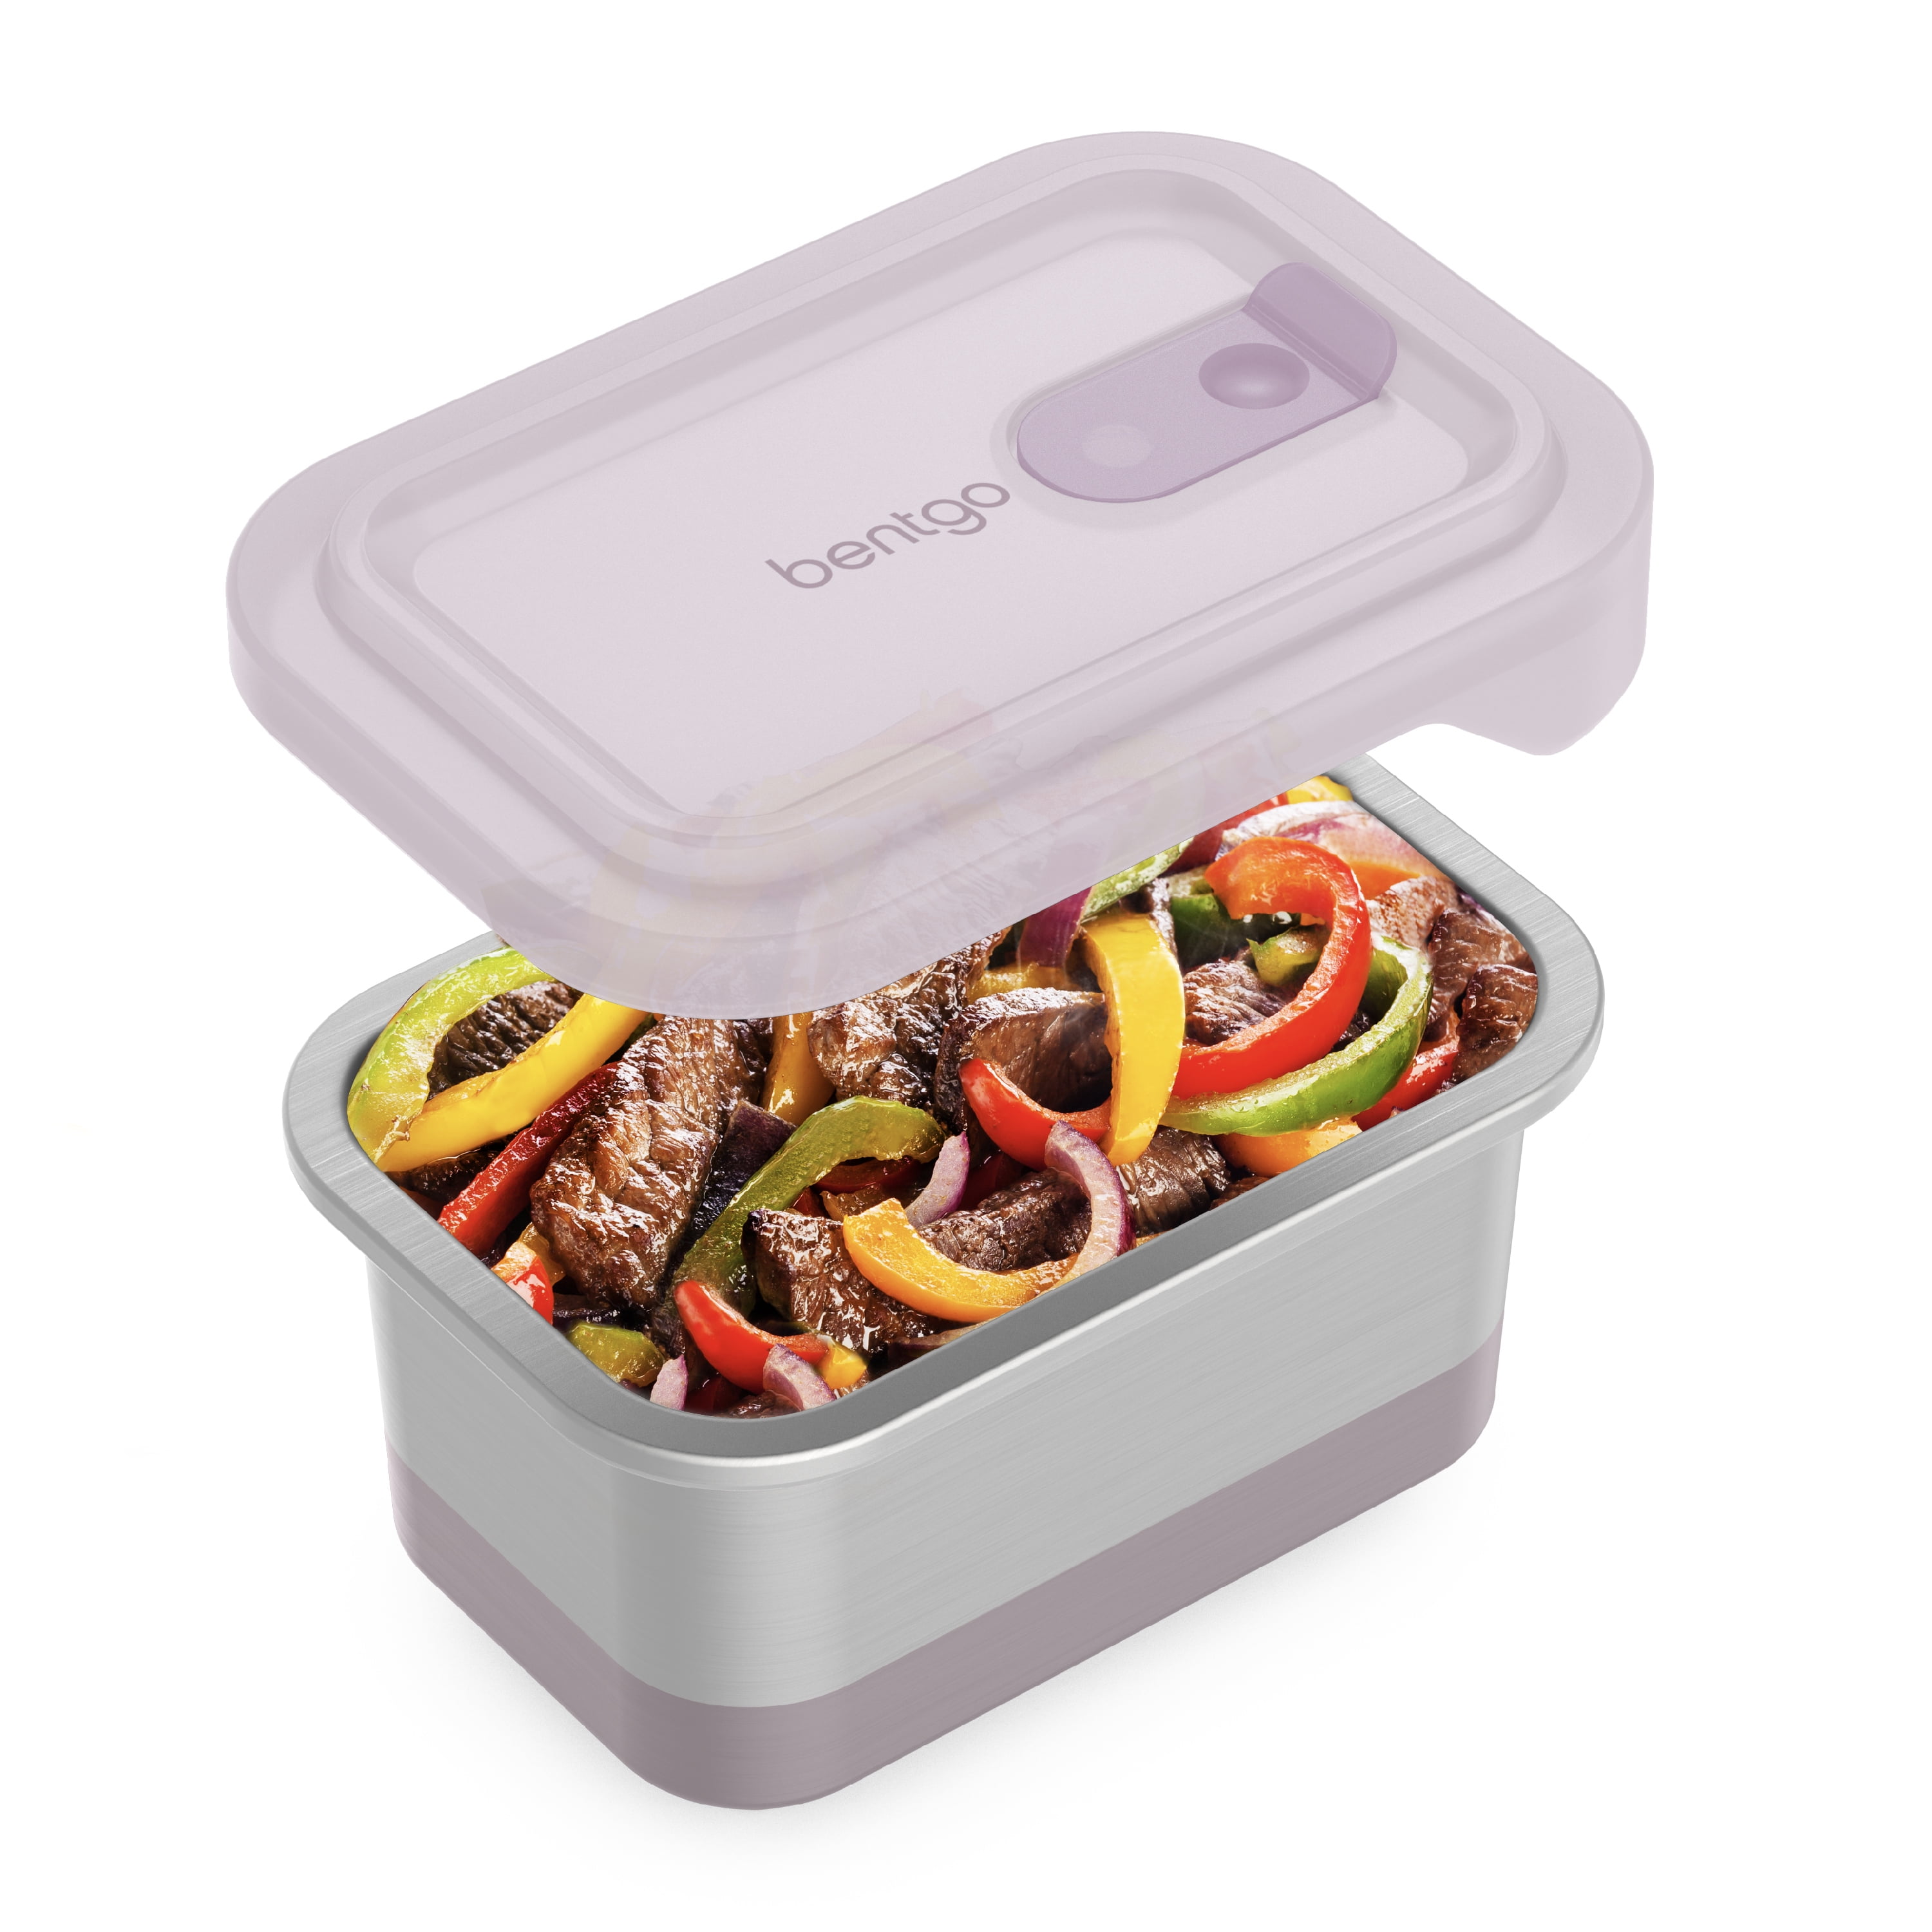 MyGo Container Small To-Go 3-Compartment Food Container, 8 x 8 x 2-1/2,  Reusable, Microwave Safe, NSF Certified, Smoke/Green